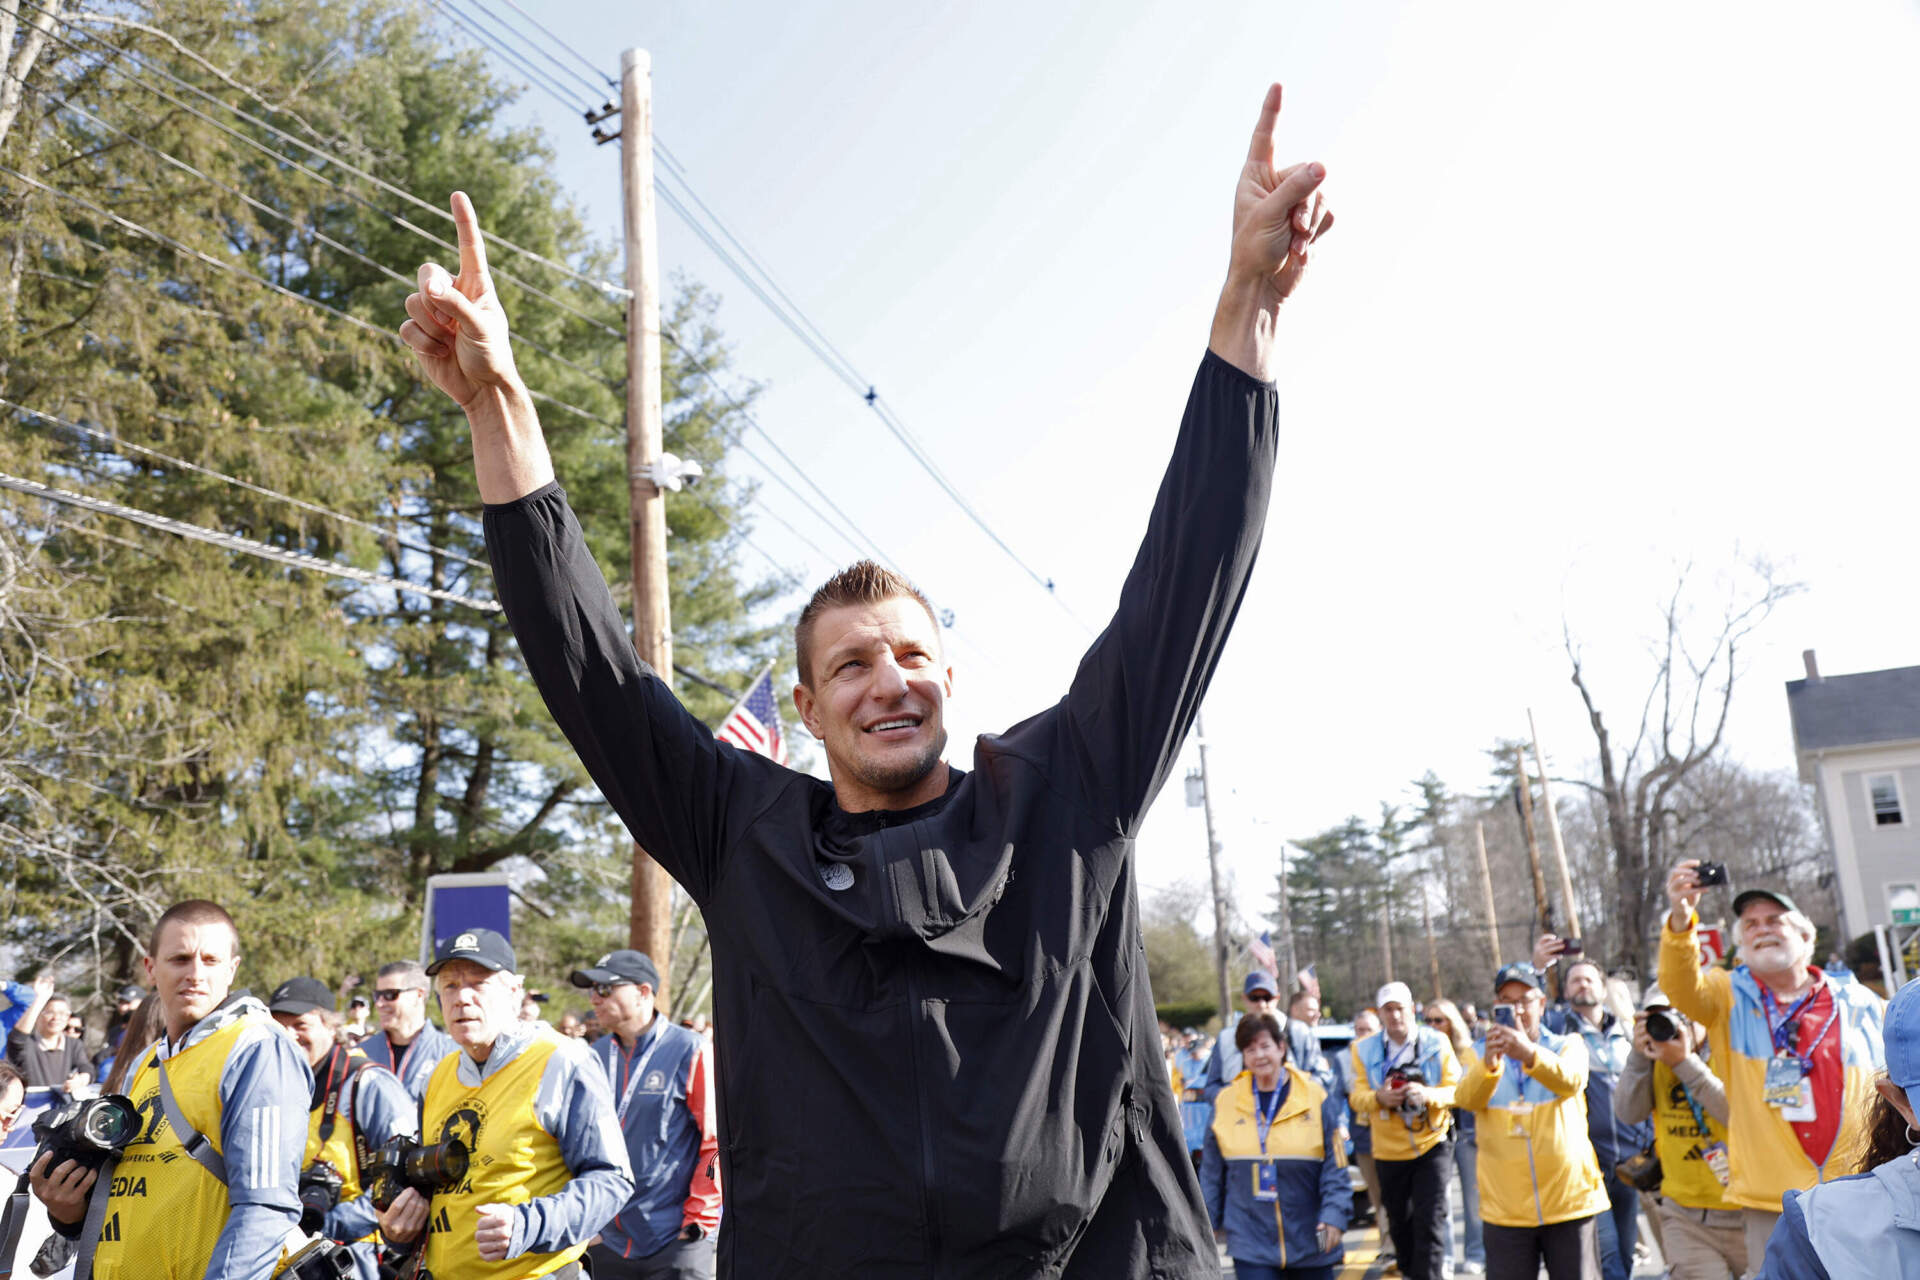 Grand Marshal and former New England Patriots NFL football player Rob Gronkowski interacts with the crowd at the start of the Boston Marathon in Hopkinton, Mass. (Mary Schwalm/AP)